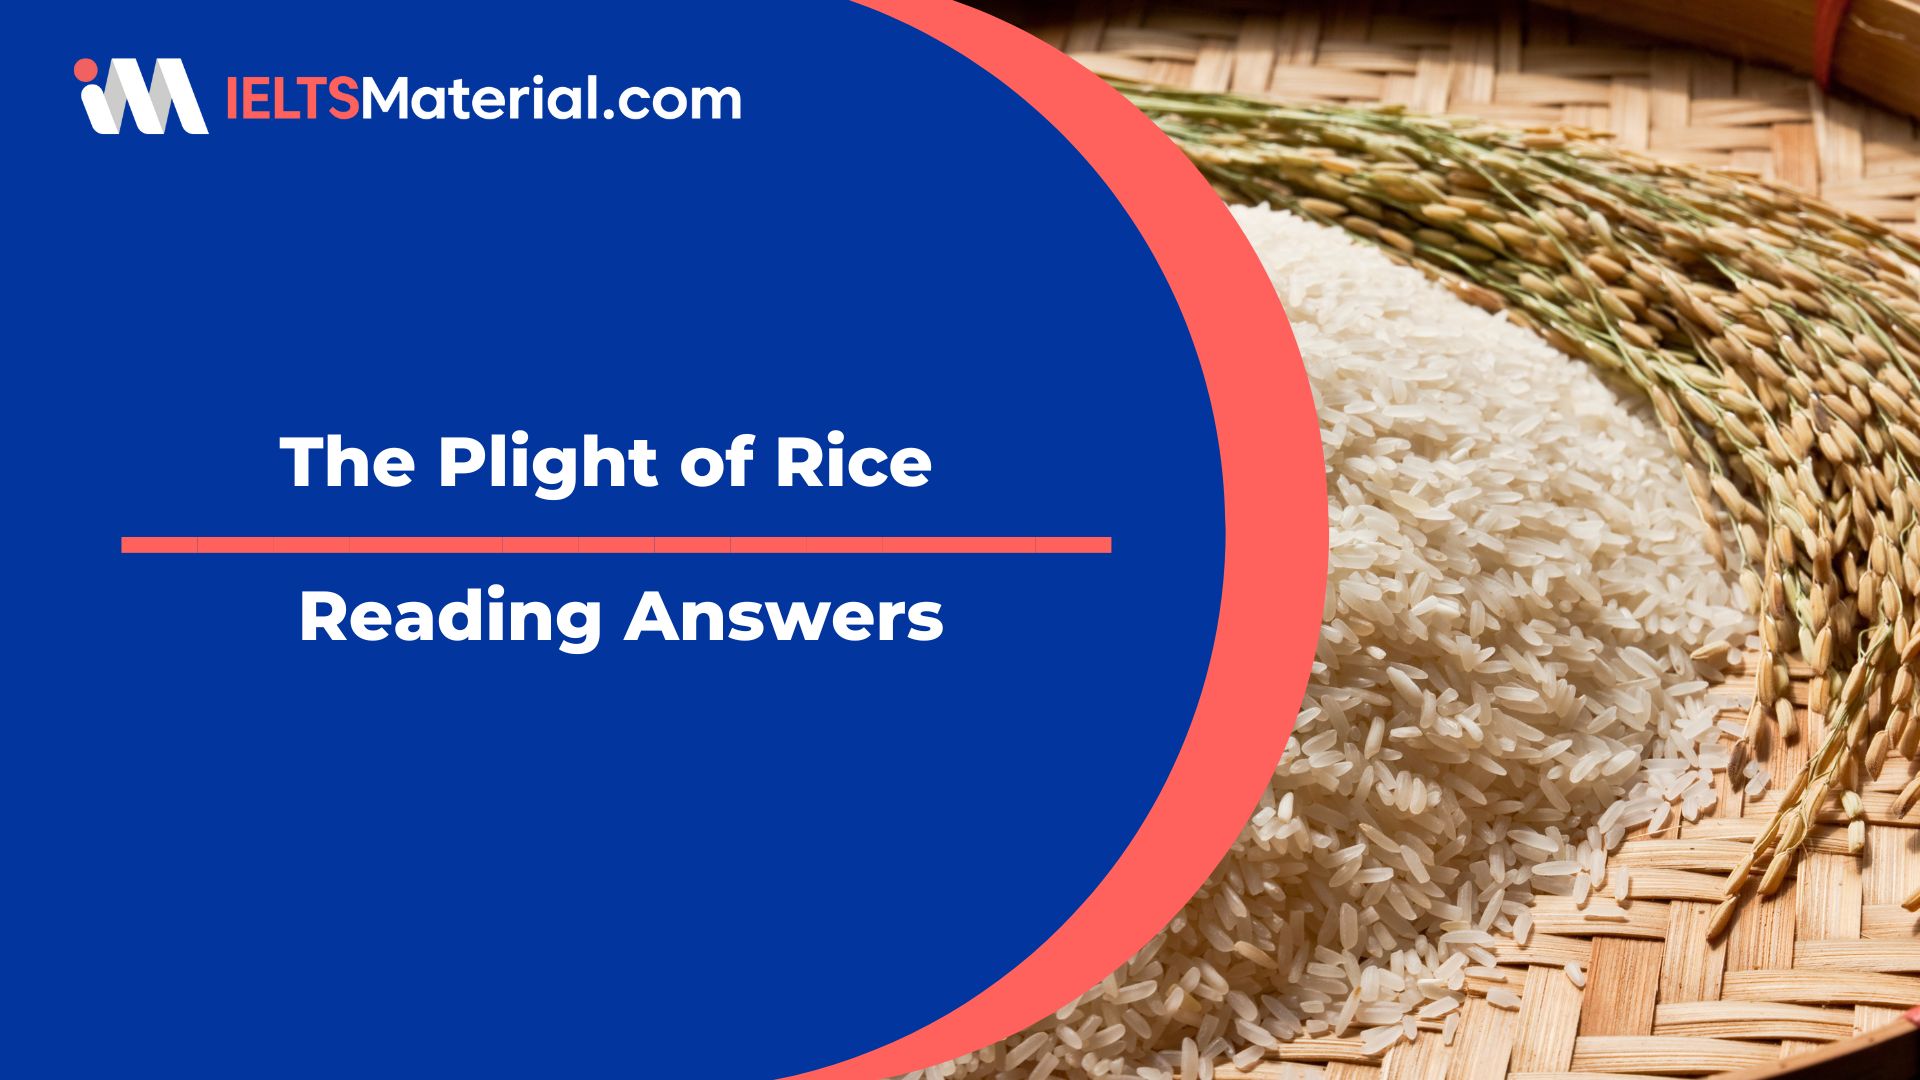 The Plight of Rice Reading Answers